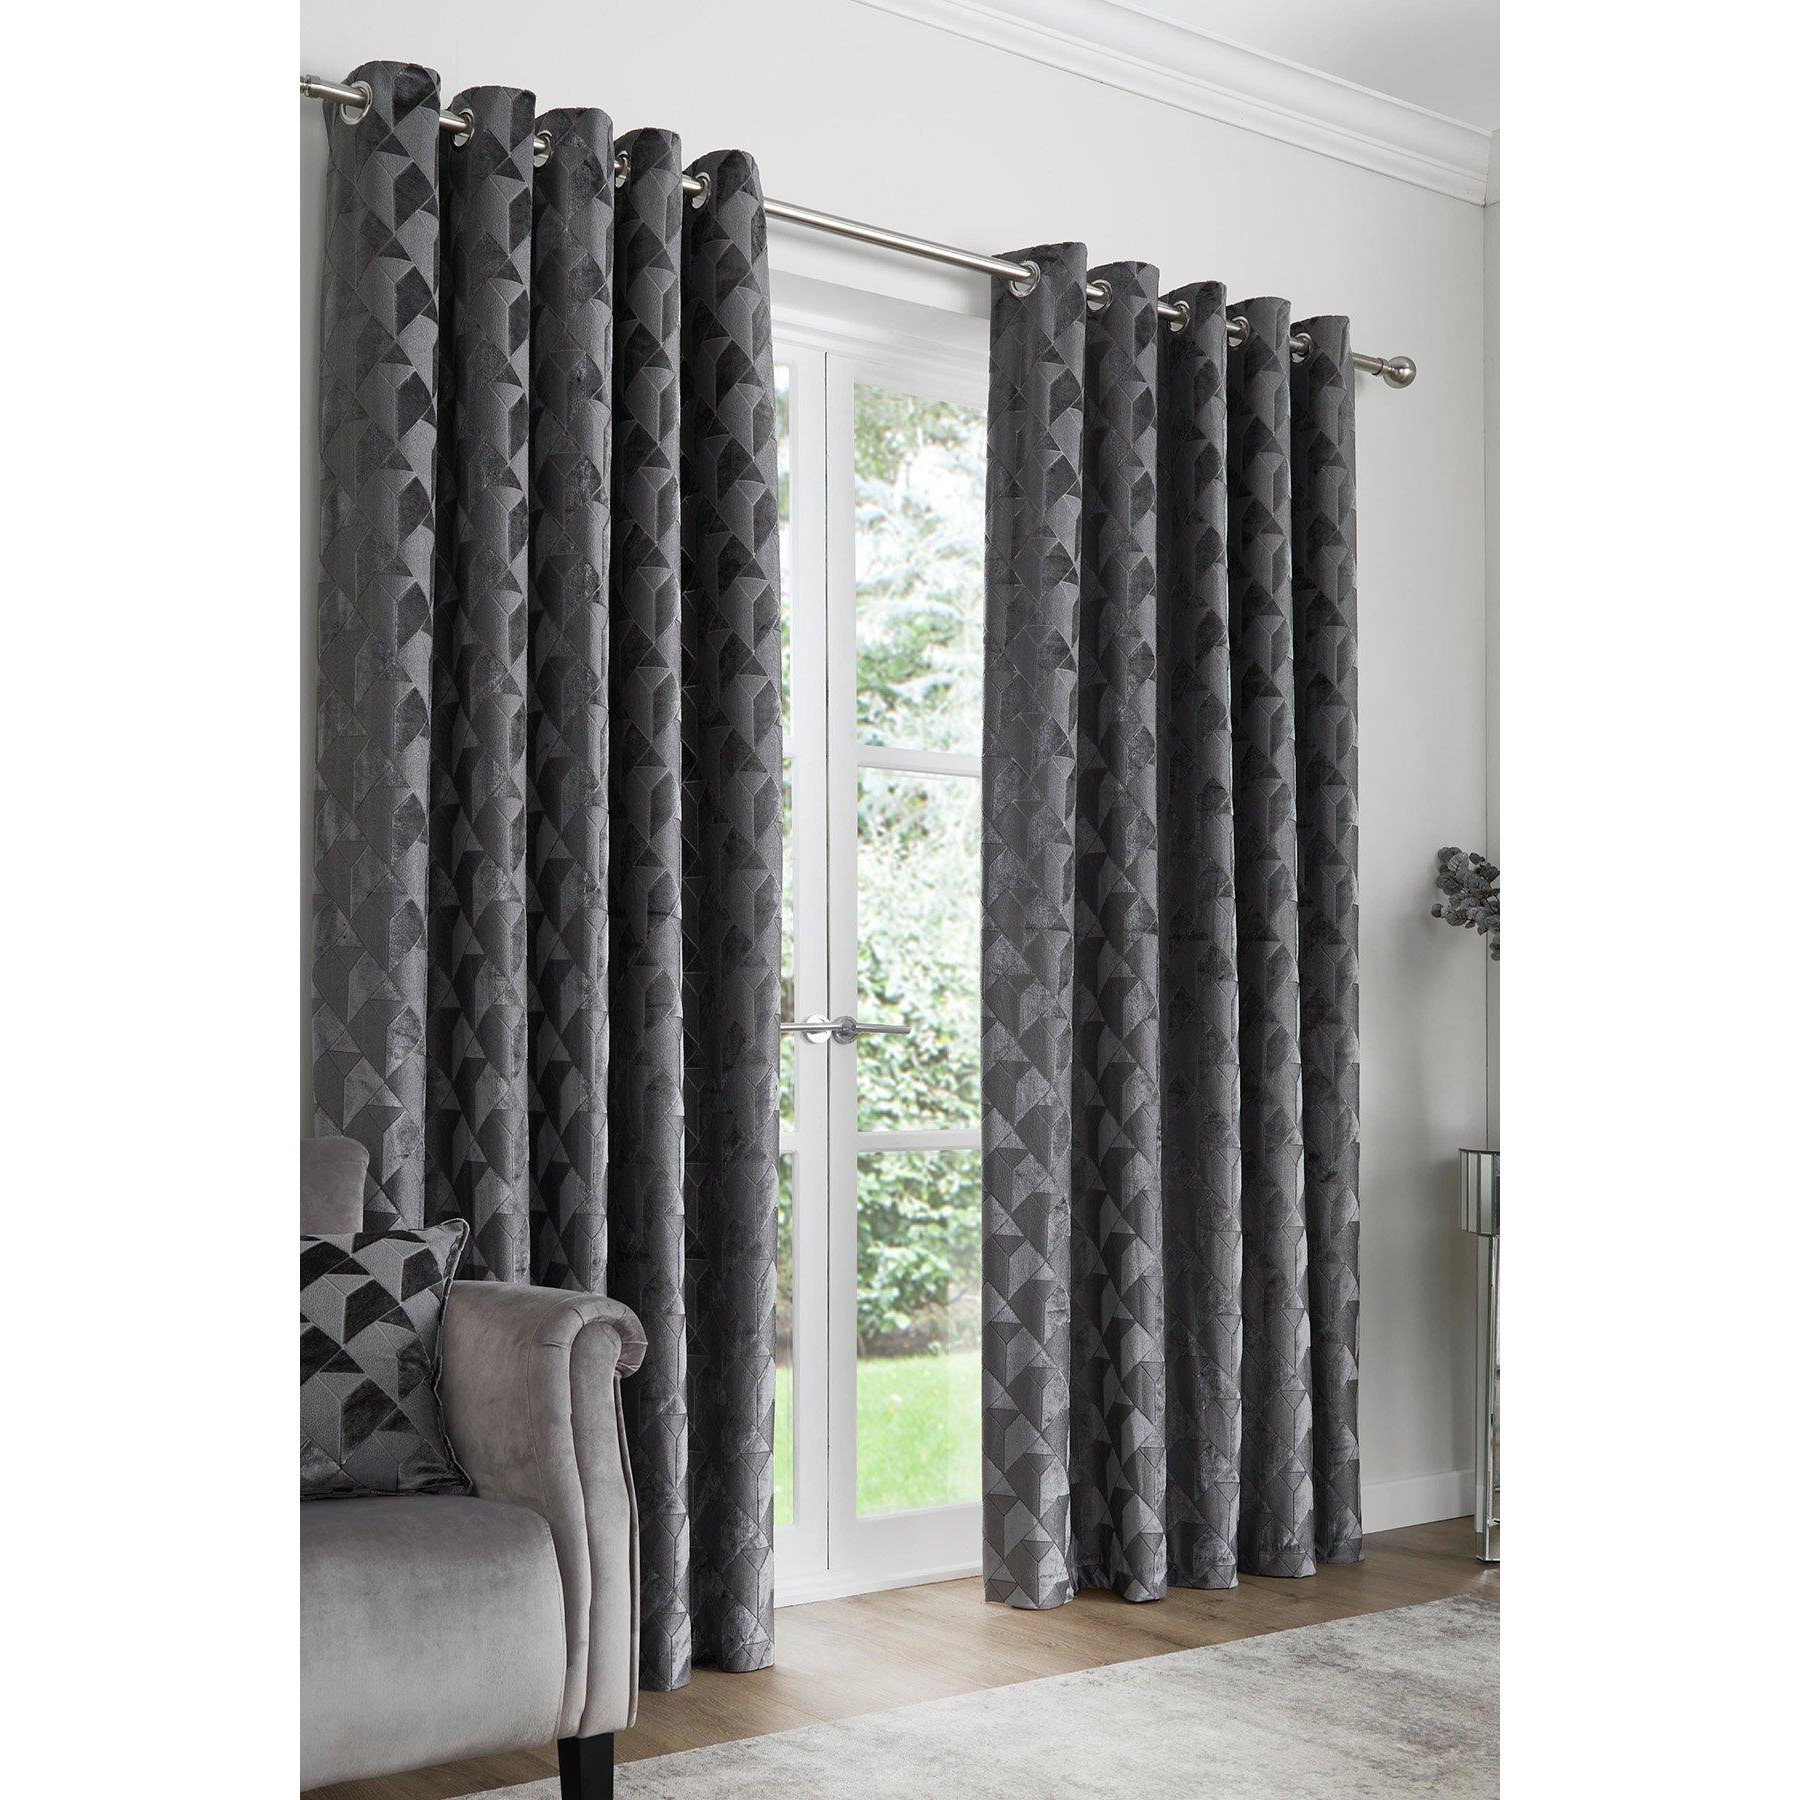 'Quentin' Jacquard Pair of Eyelet Curtains - image 1